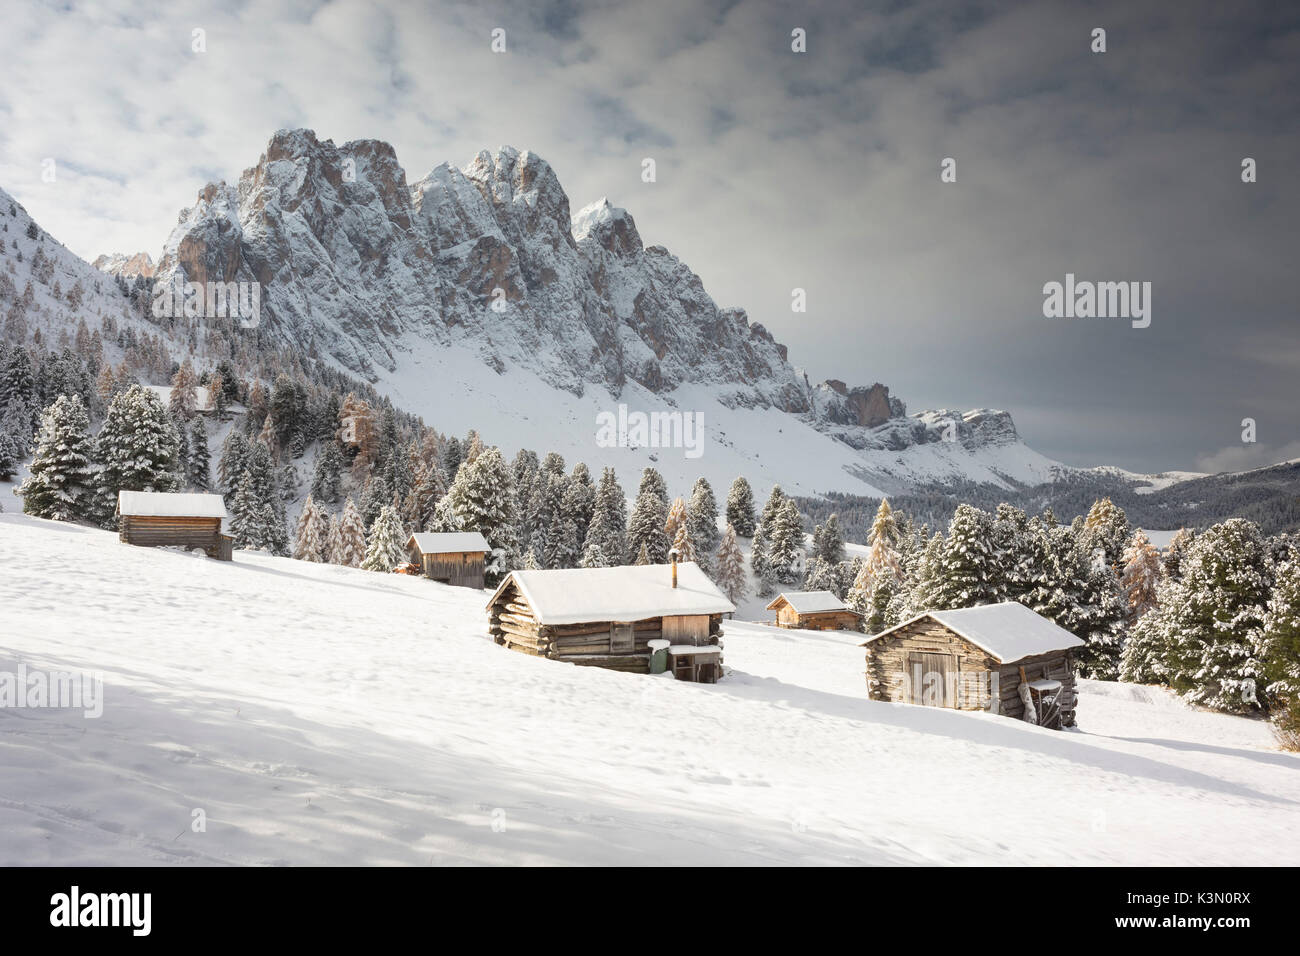 a winter view of the Puez Geisler Natural Park in Villnöss with some huts in foreground and the Geisler in the background, Bolzano province, South Tyrol, Trentino Alto Adige, Italy, Europe Stock Photo